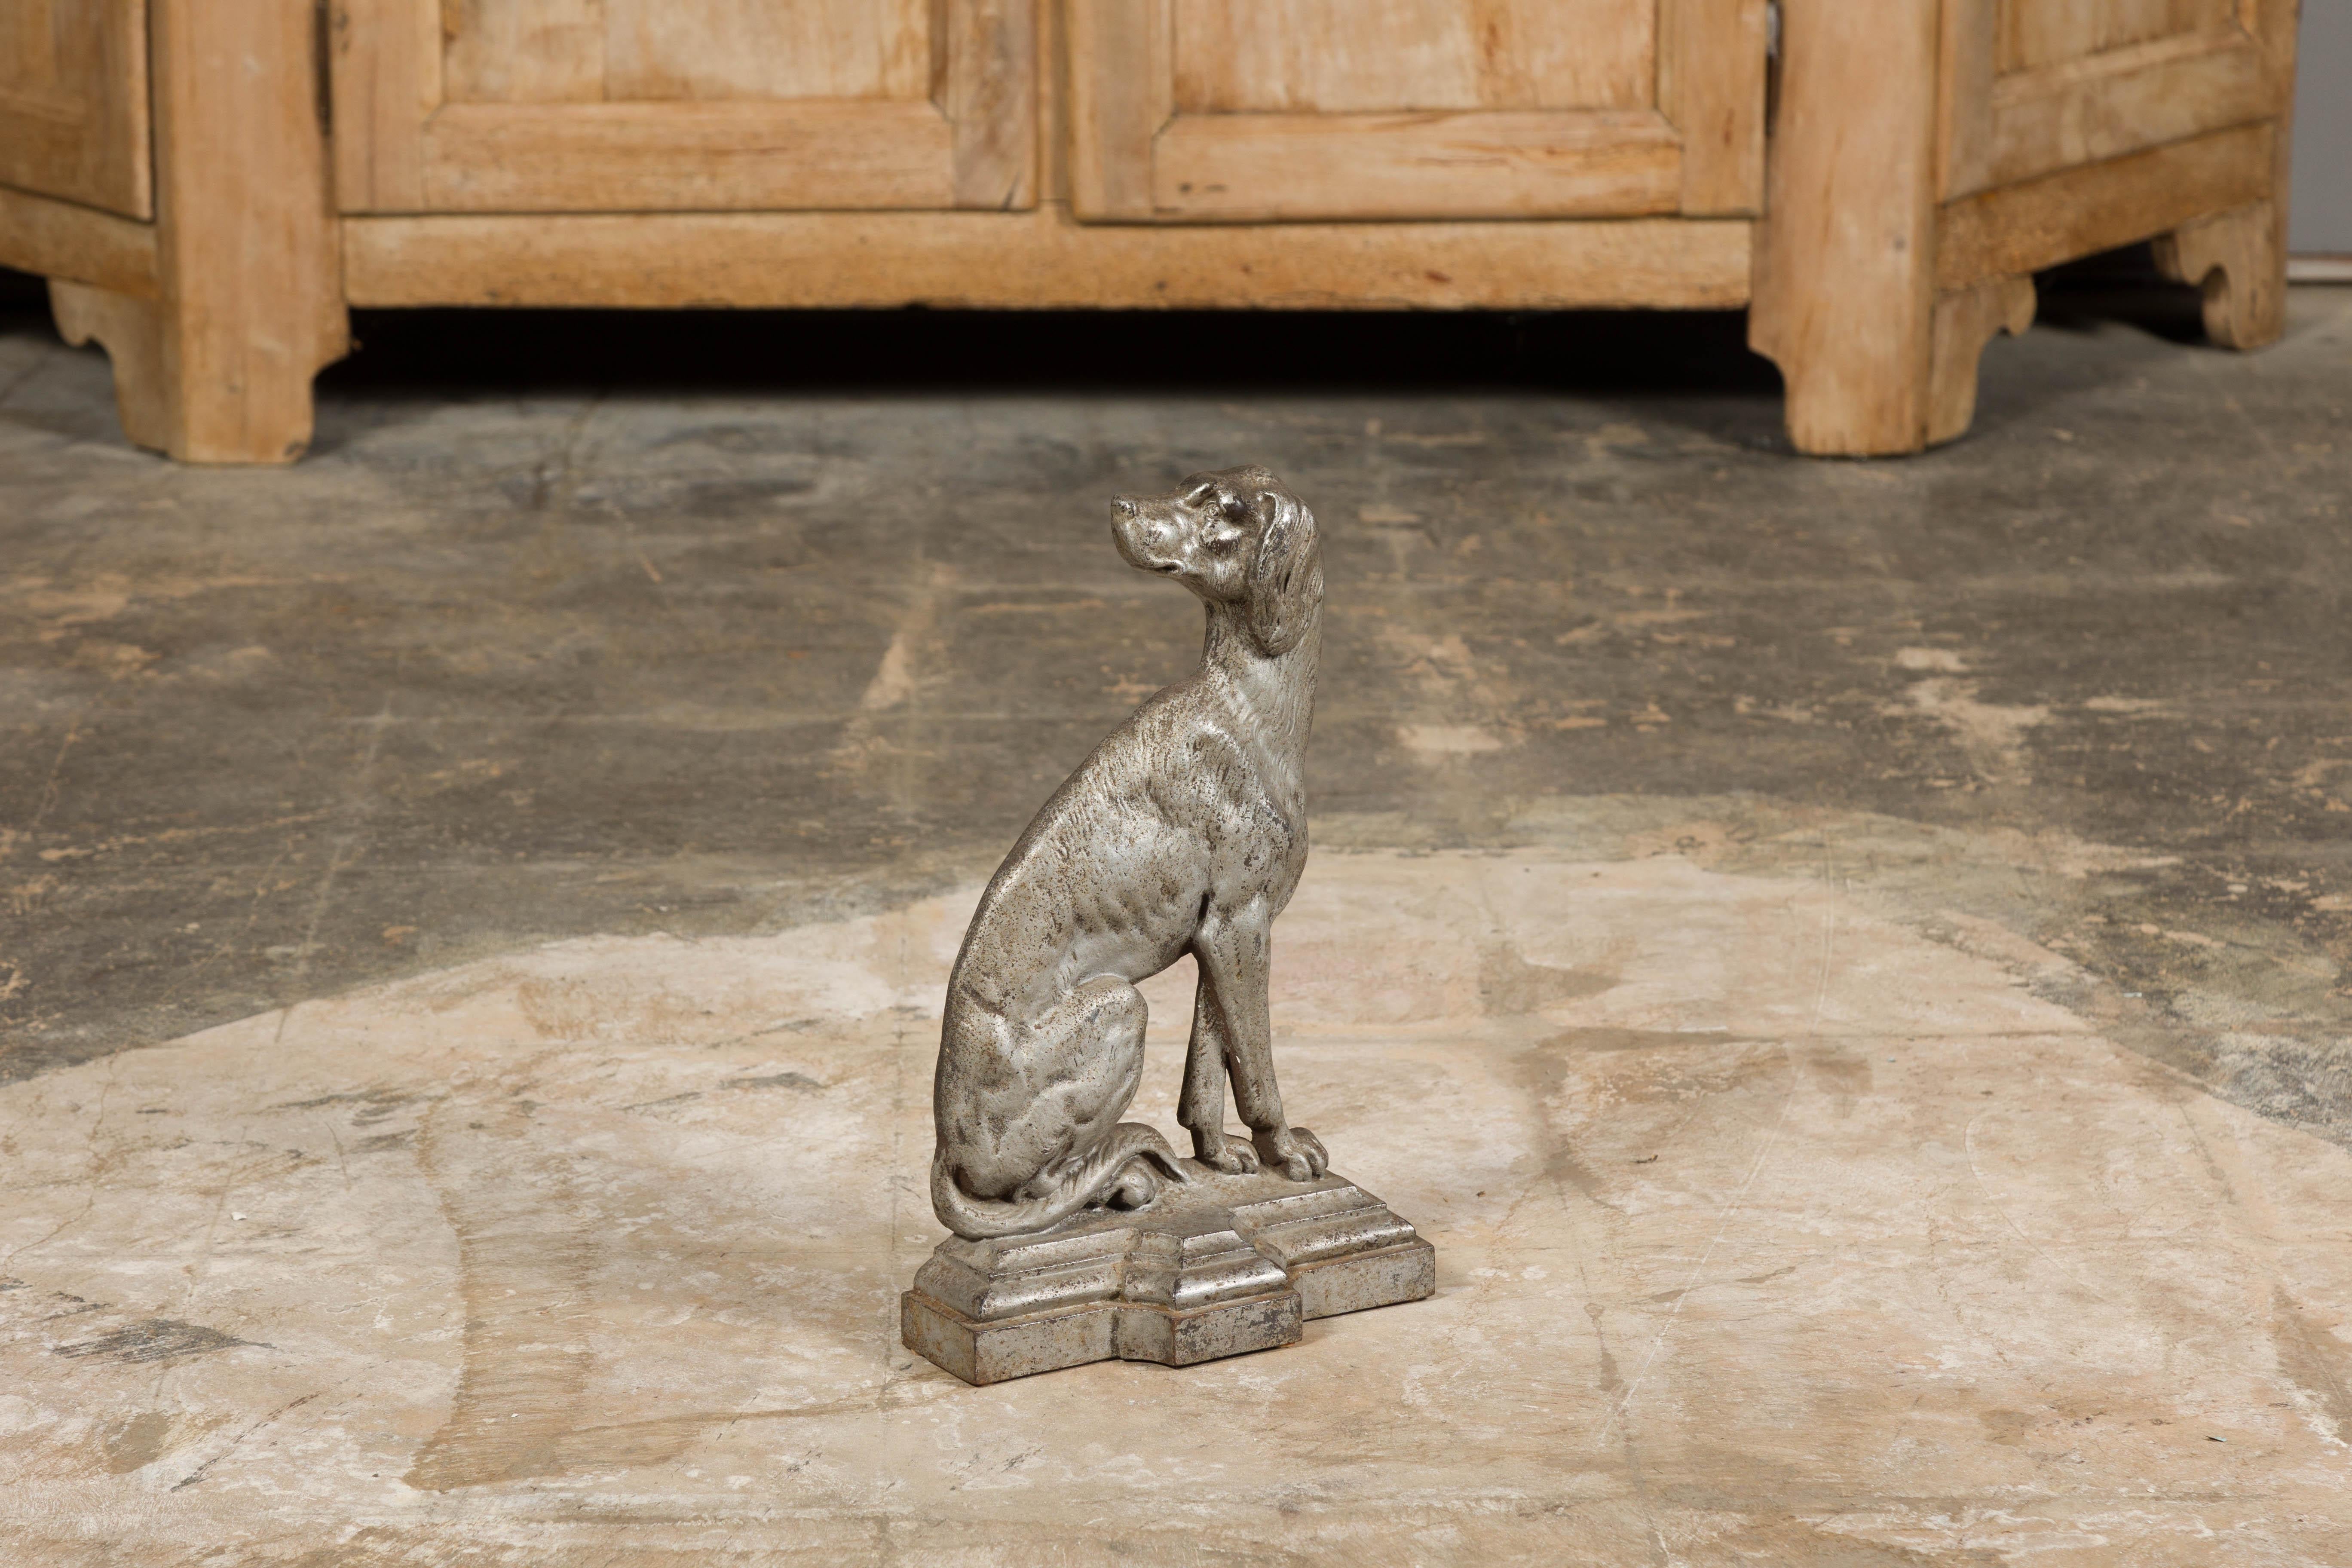 Late Victorian English Silvered Door Stop Depicting a Dog, circa 1880-1900 For Sale 5